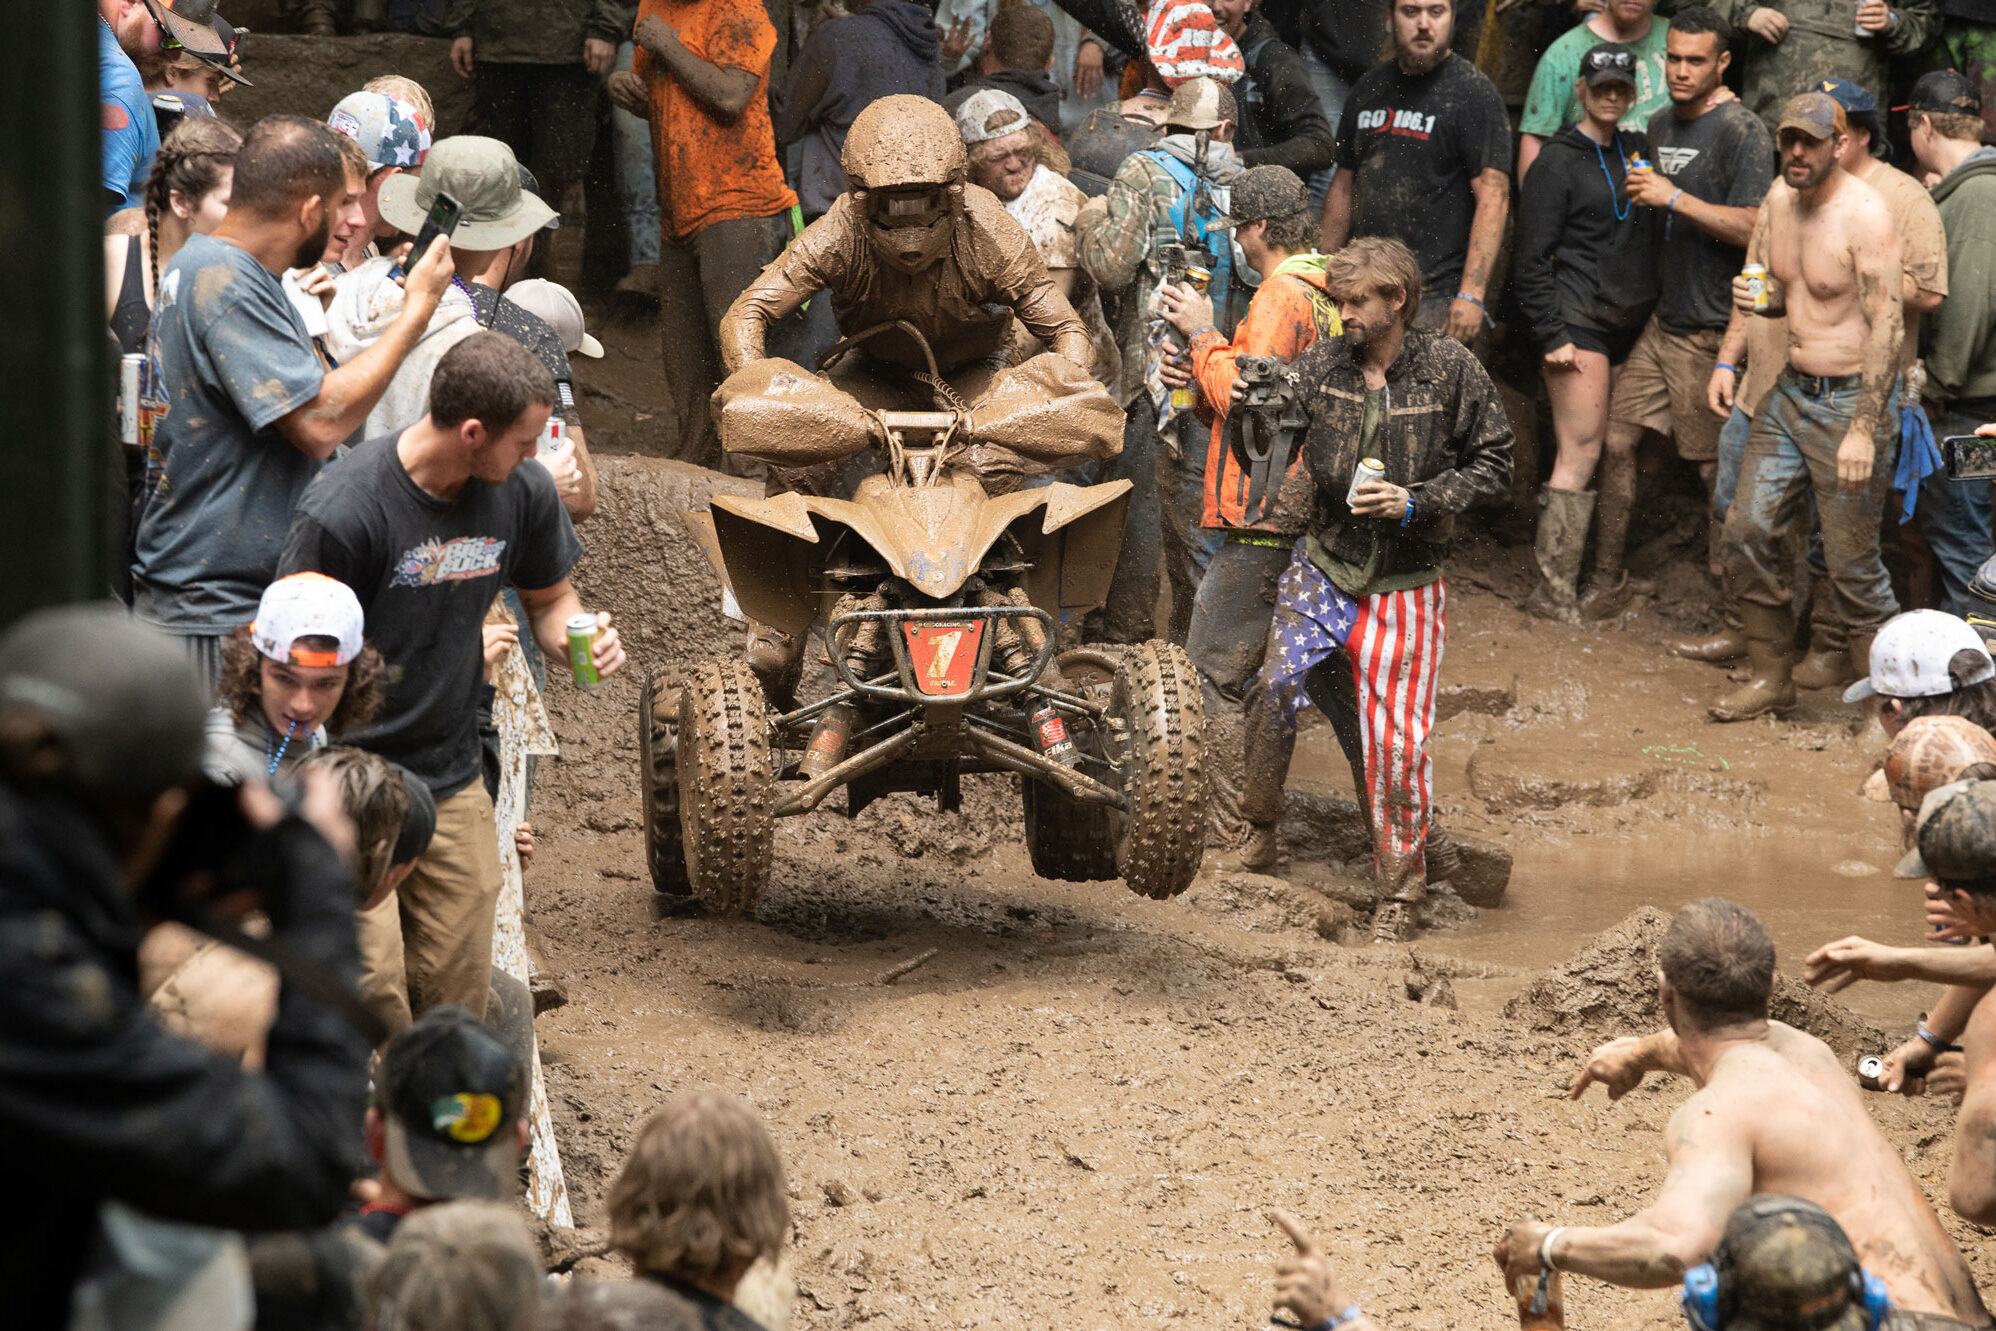 Brycen Neal making his way through "Howards Hole" at the Snowshoe GNCC.